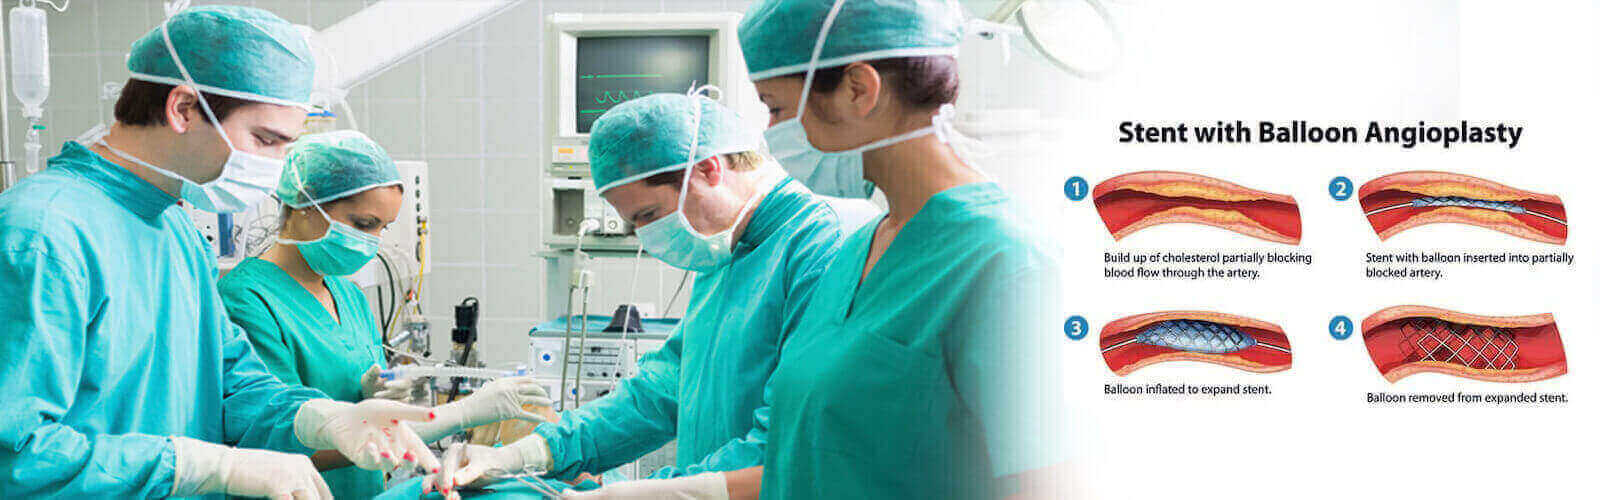 Angioplasty Surgery in Afghanistan